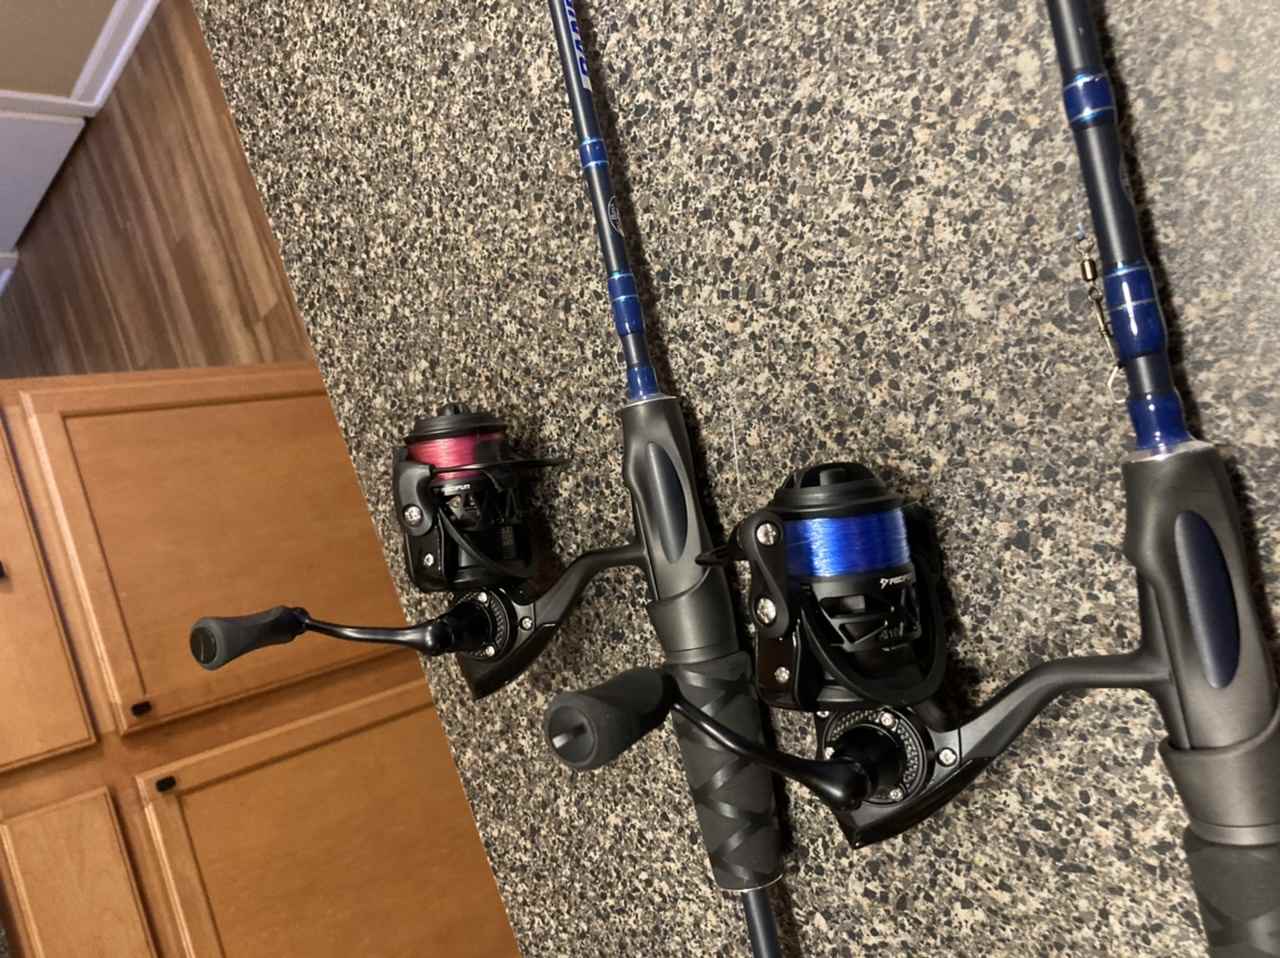 Any Kastking fans out there? - Fishing Rods, Reels, Line, and